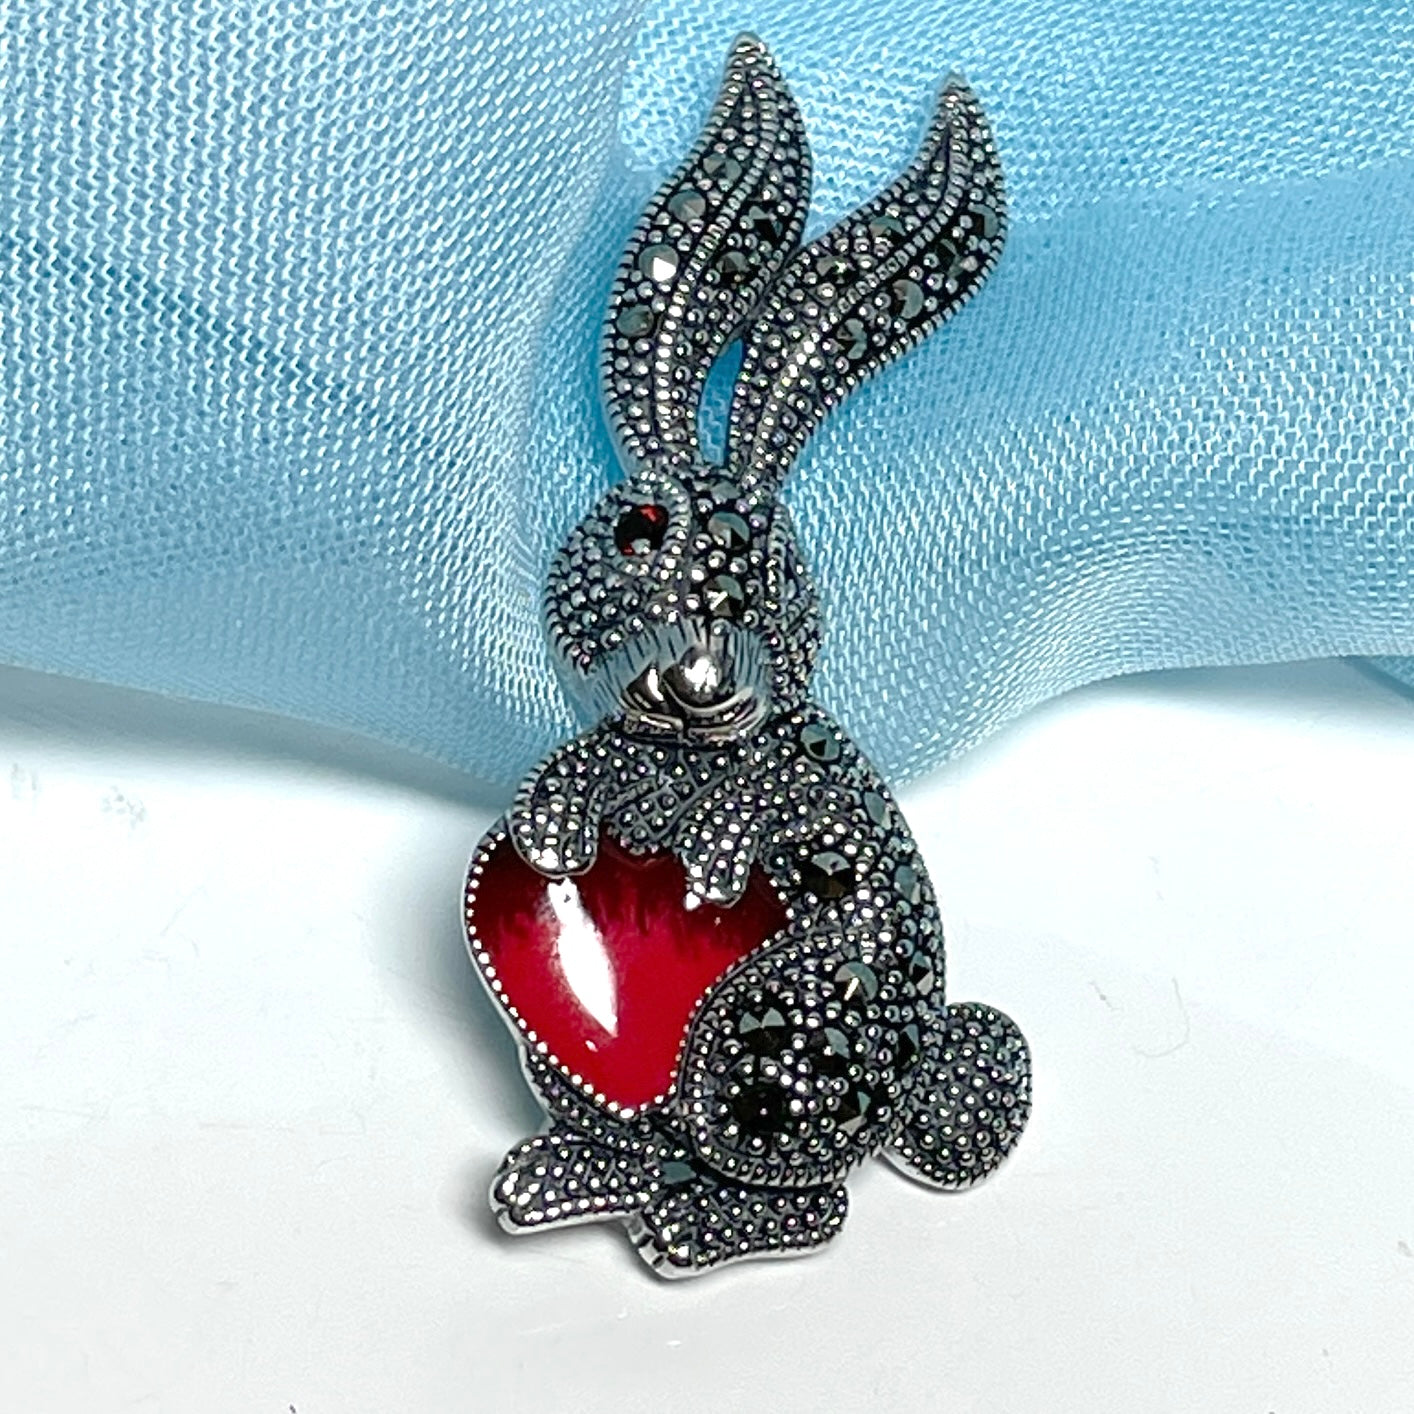 Rabbit necklace and brooch